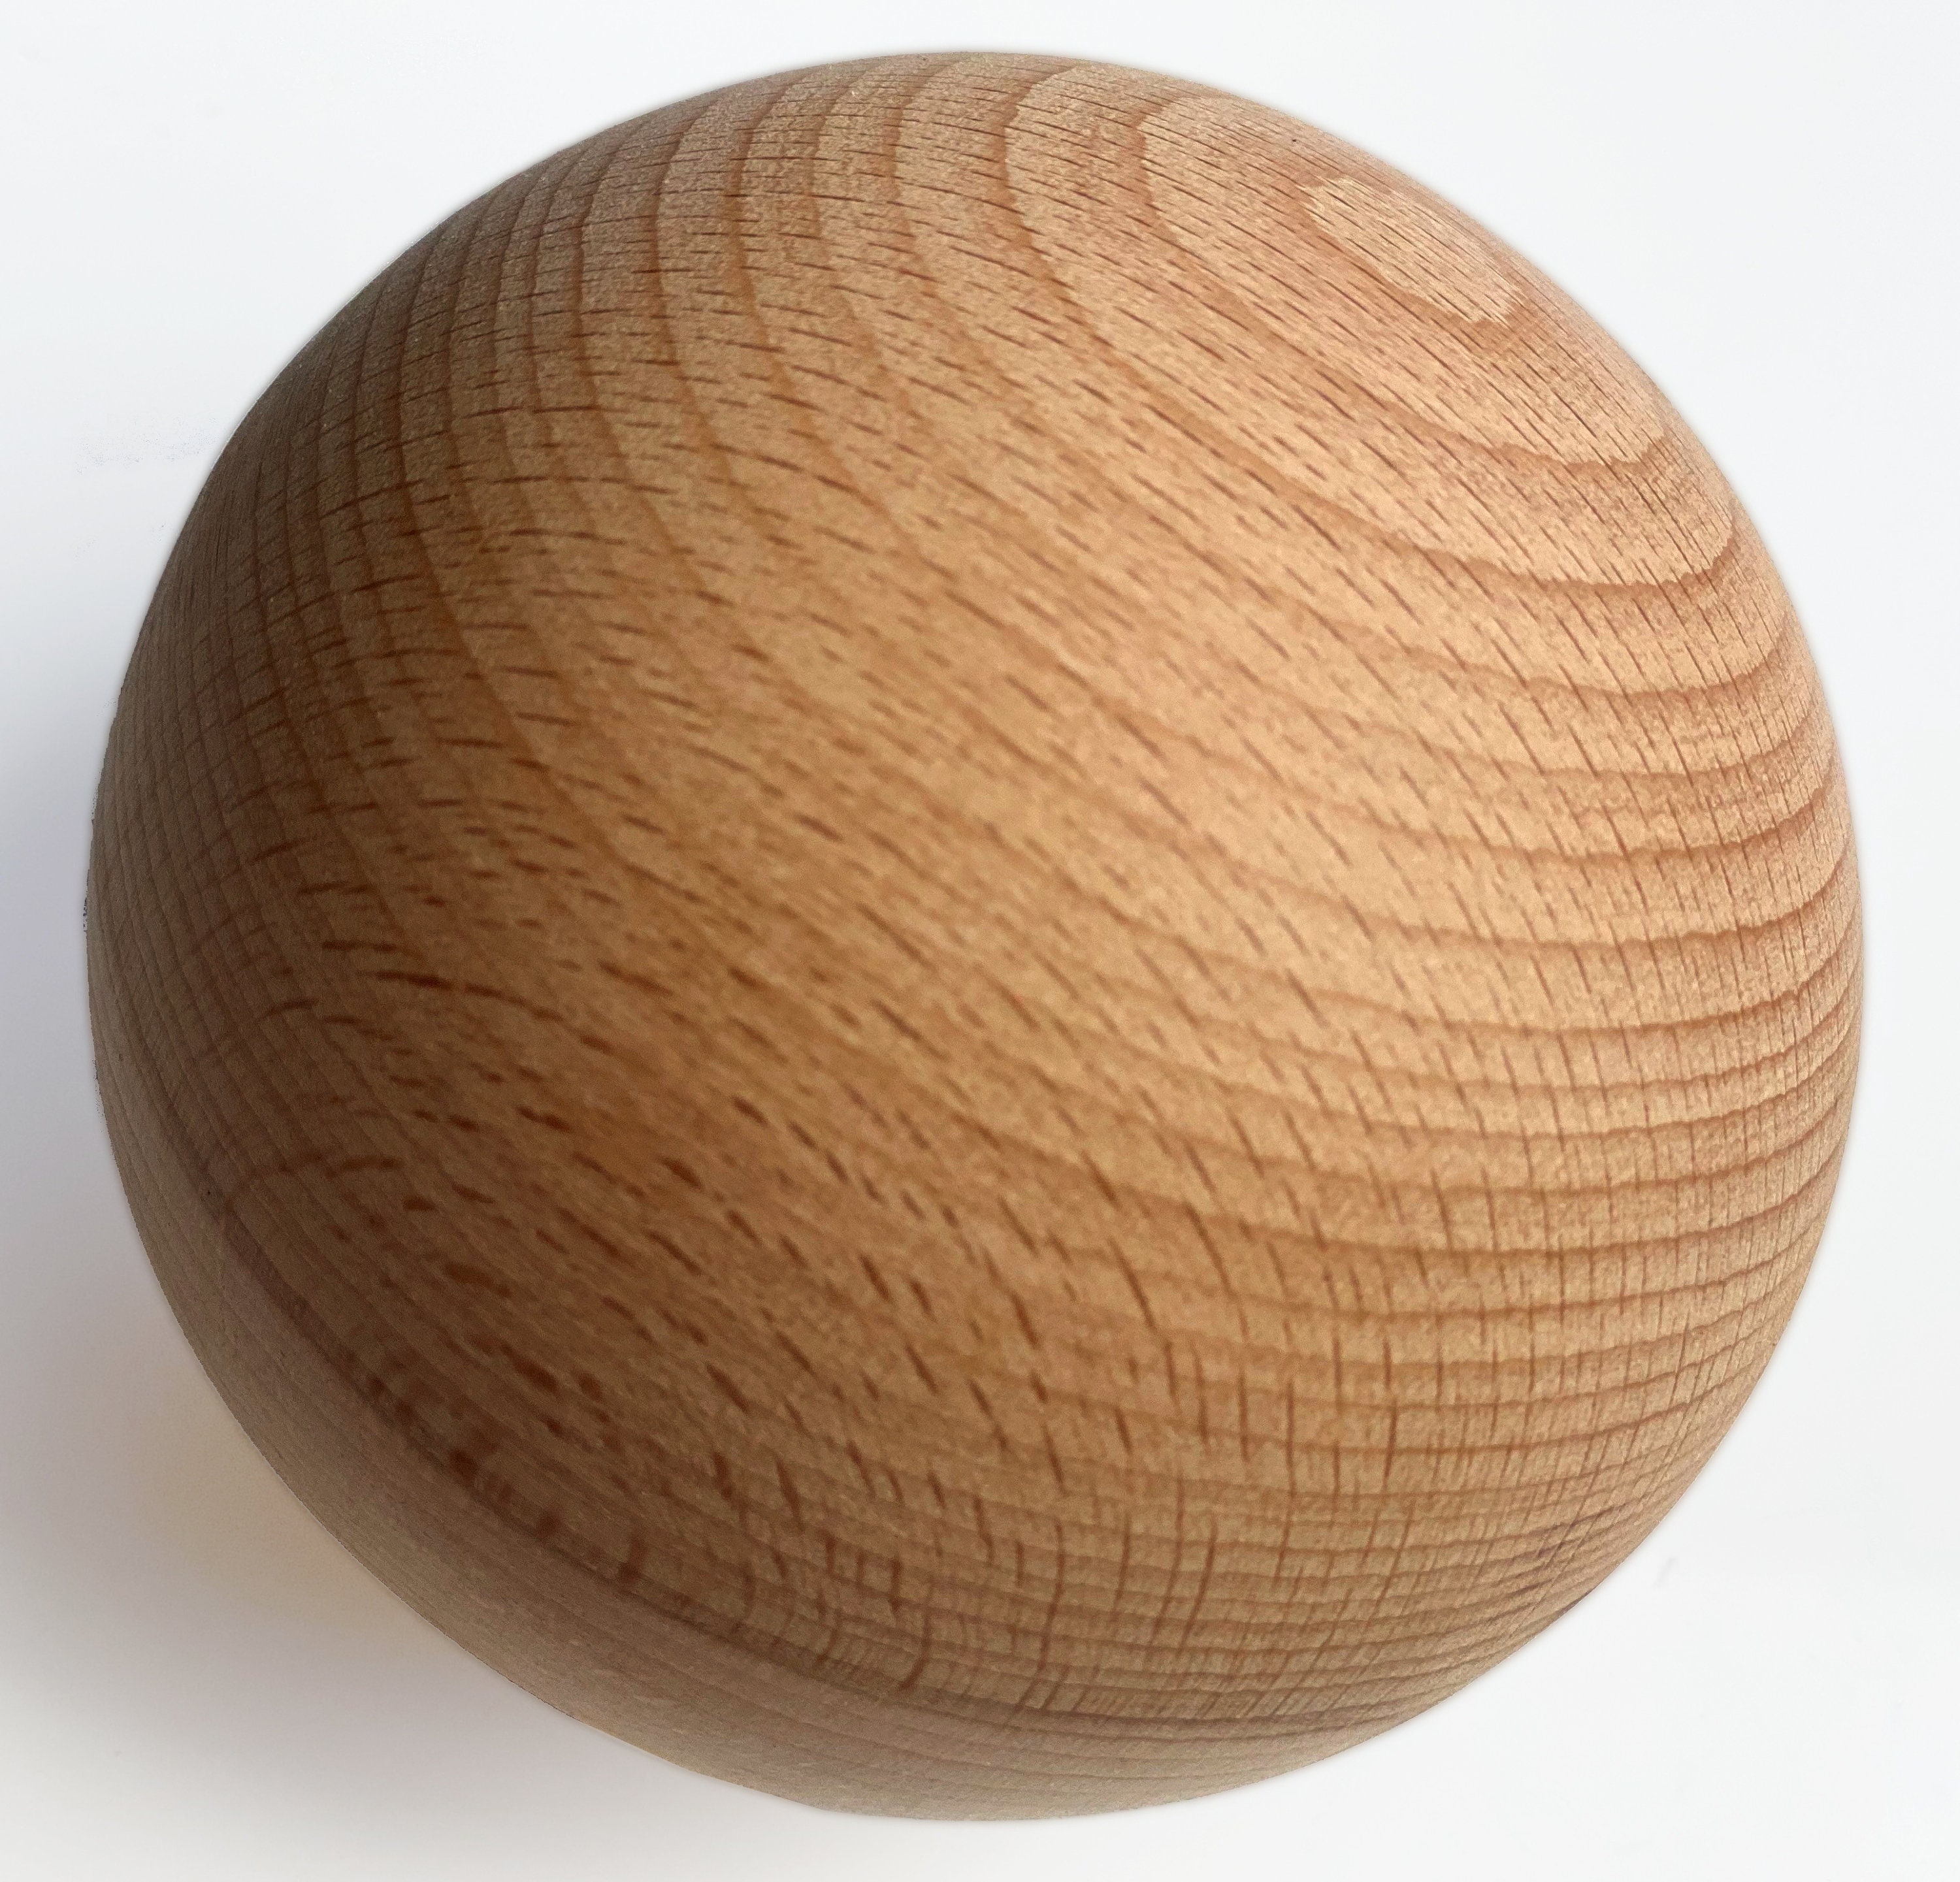 3 Inch Wooden Solid Round Ball - Kgkrafts's Boutique